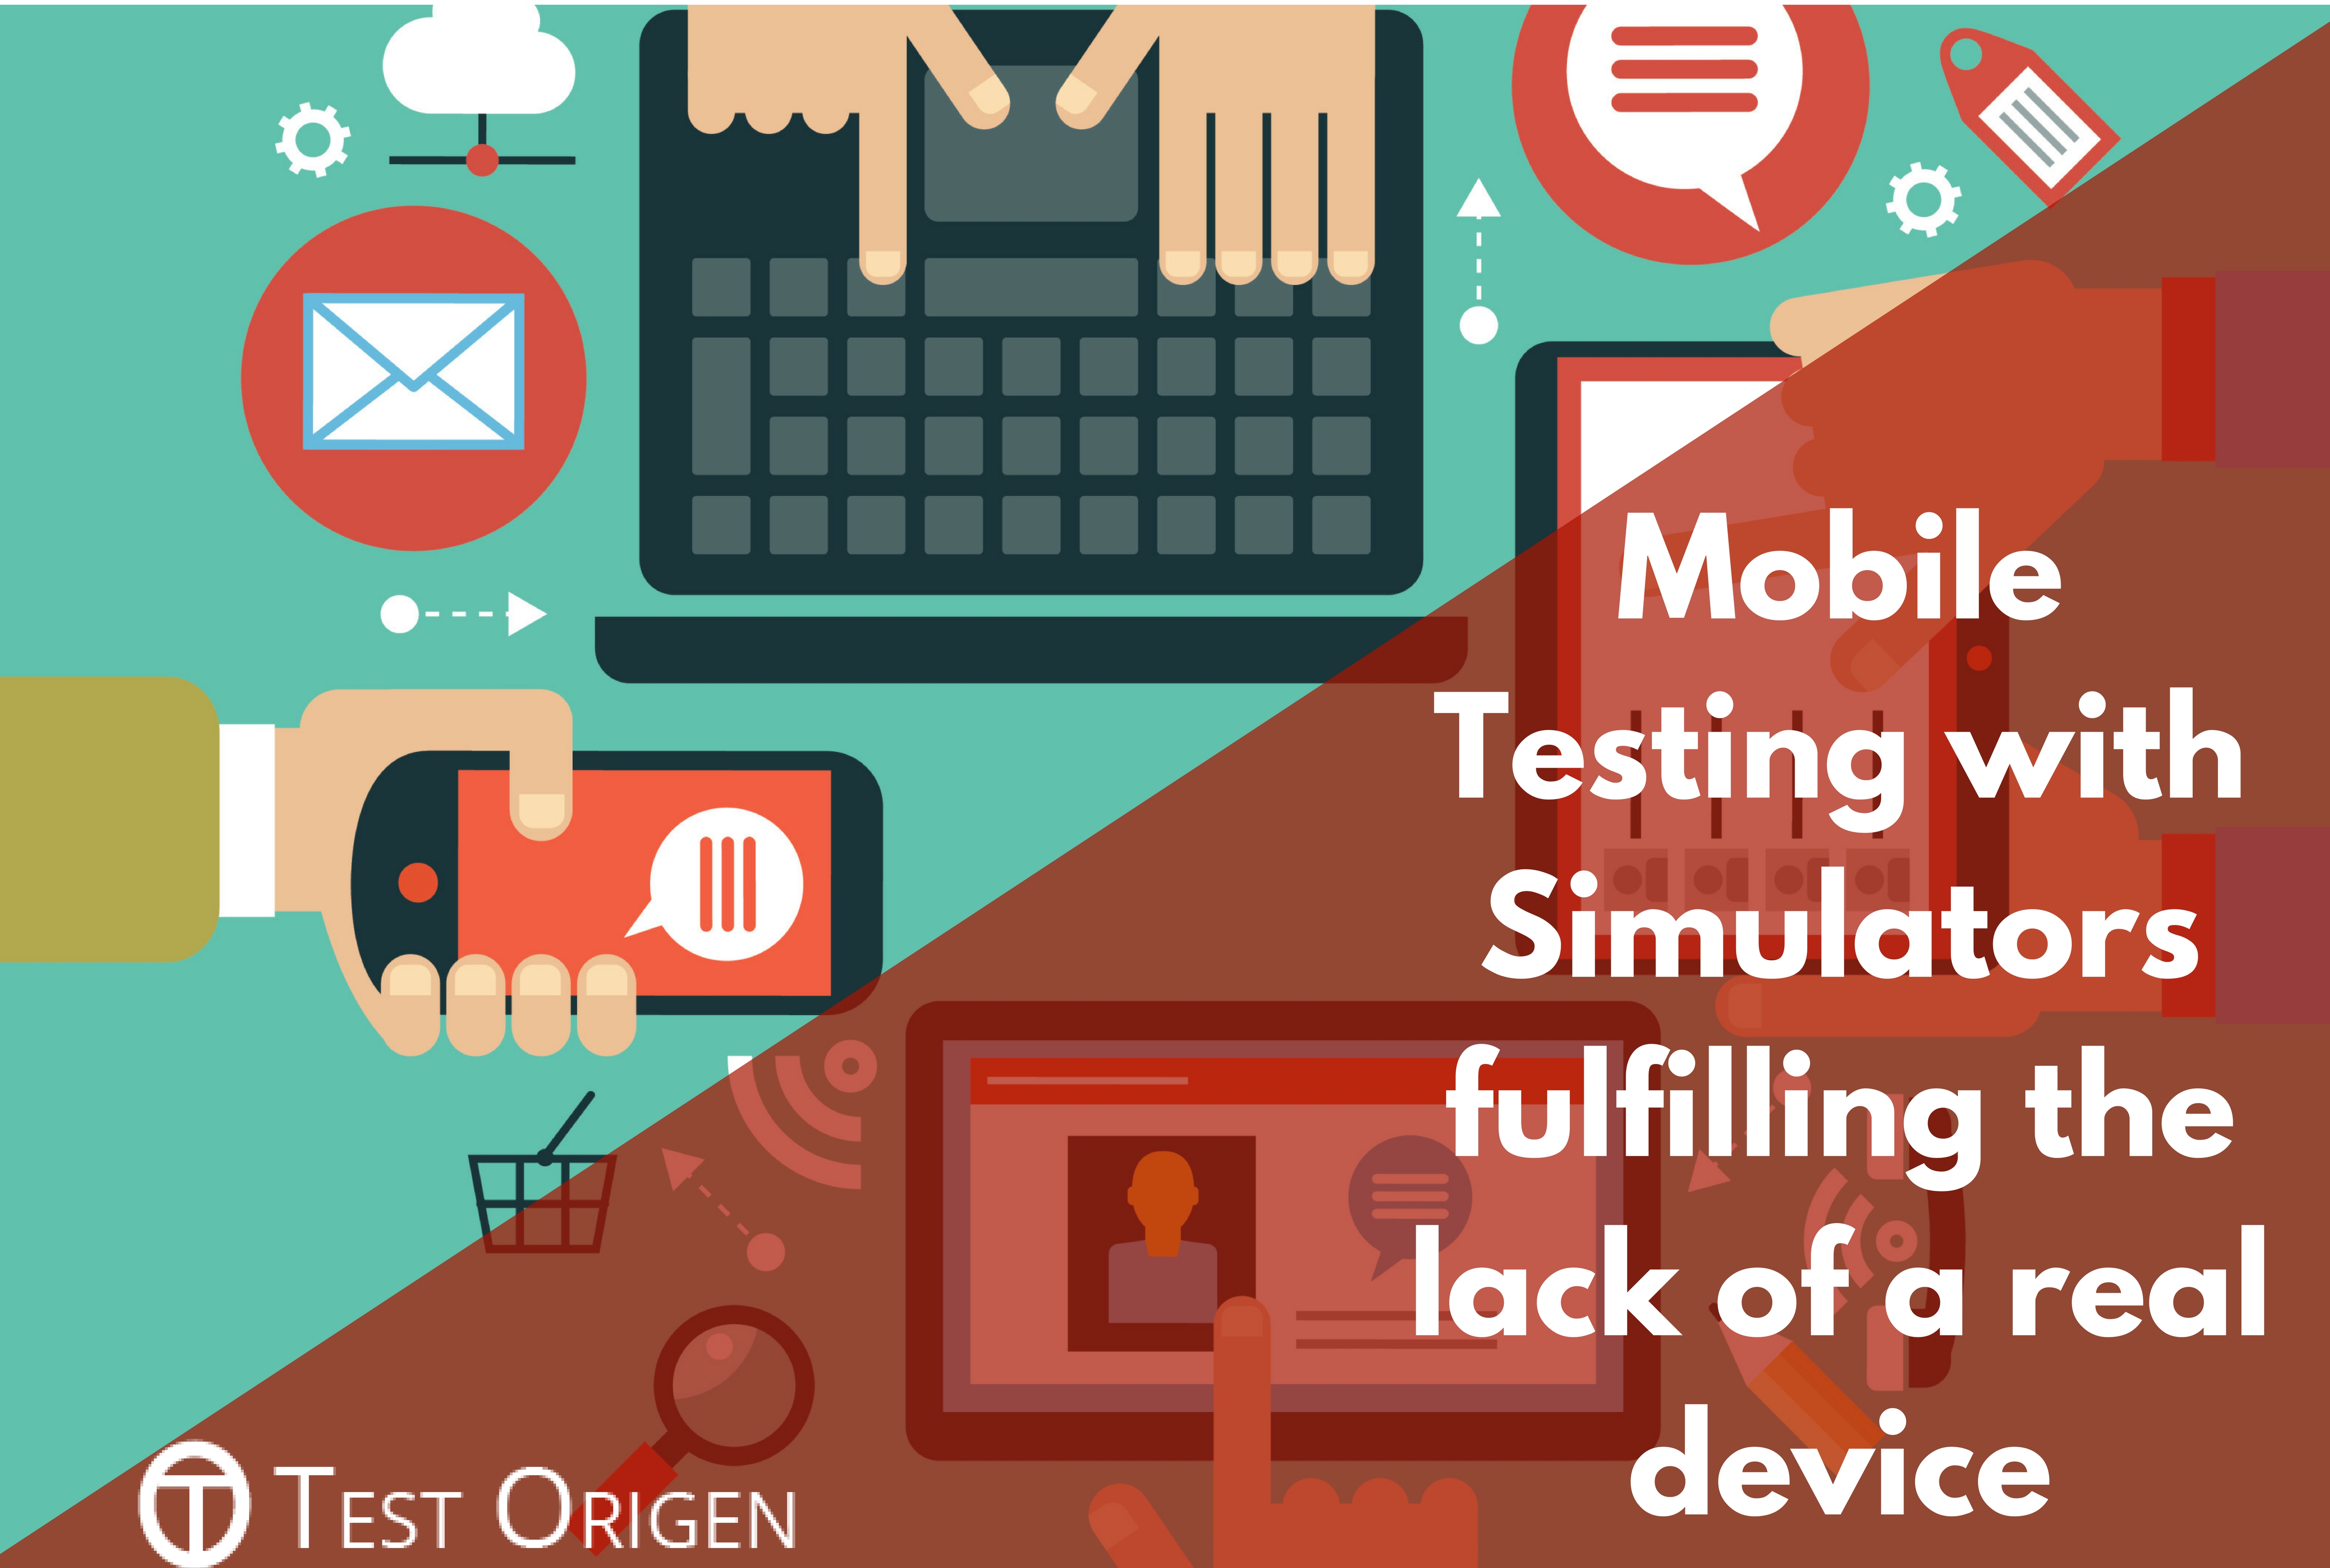 Mobile Testing with Simulators fulfilling the lack of a real device